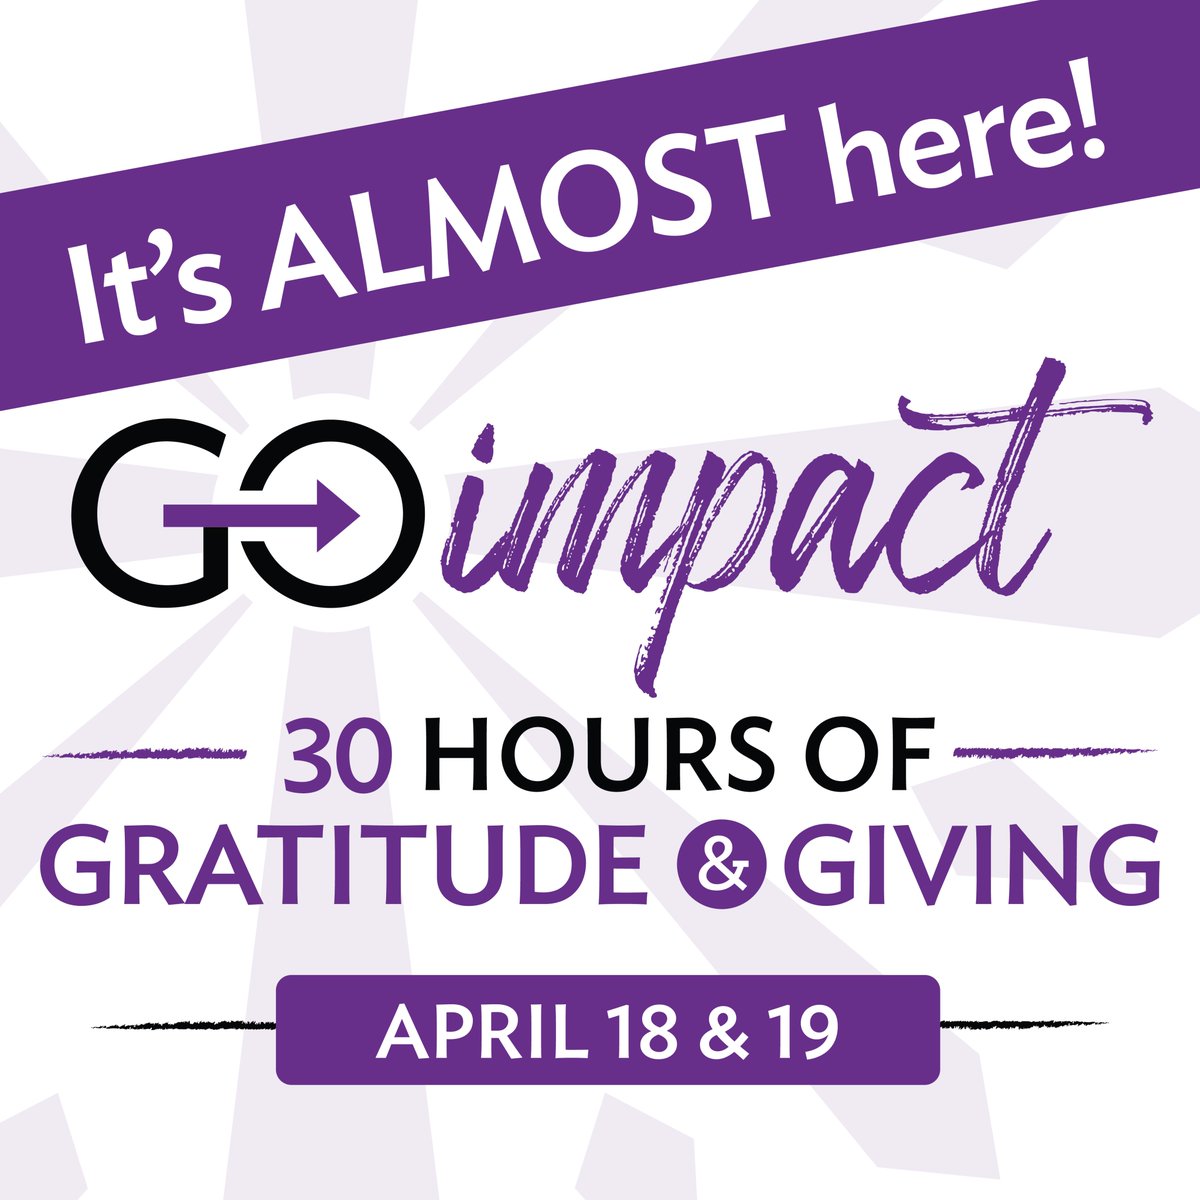 30 Hours of Gratitude & Giving kicks off at noon on April 18, and we can’t wait to see how God moves. Pray for our school. Give to help fuel our mission and students’ futures. Share what you love about CHCA using #ILoveCHCA!  #GoCHCA #ILoveCHCA